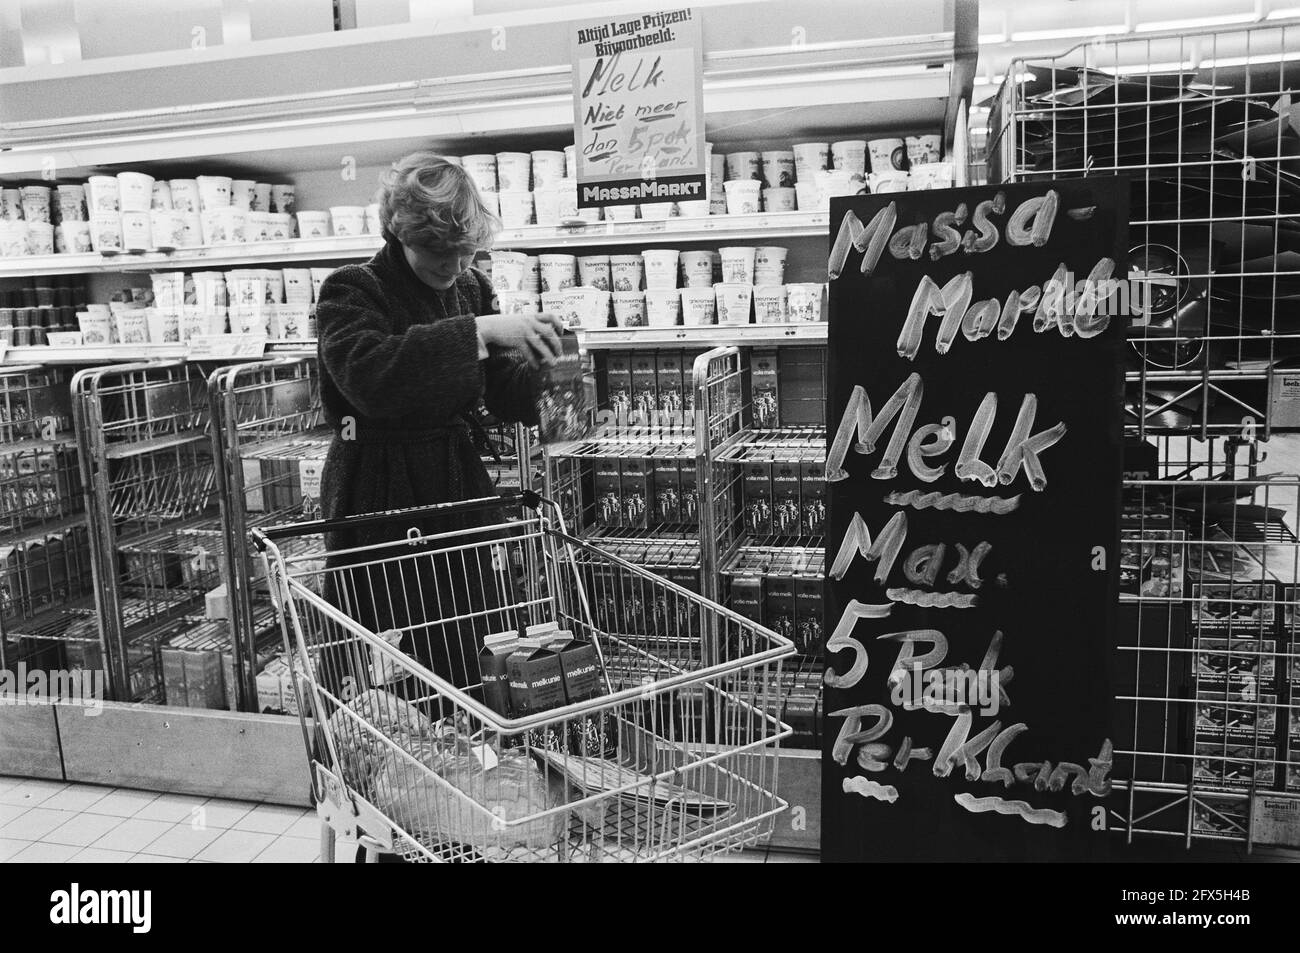 No more milk available due to strike; limited availability, January 9,  1980, MILK, strikes, The Netherlands, 20th century press agency photo, news  to remember, documentary, historic photography 1945-1990, visual stories,  human history